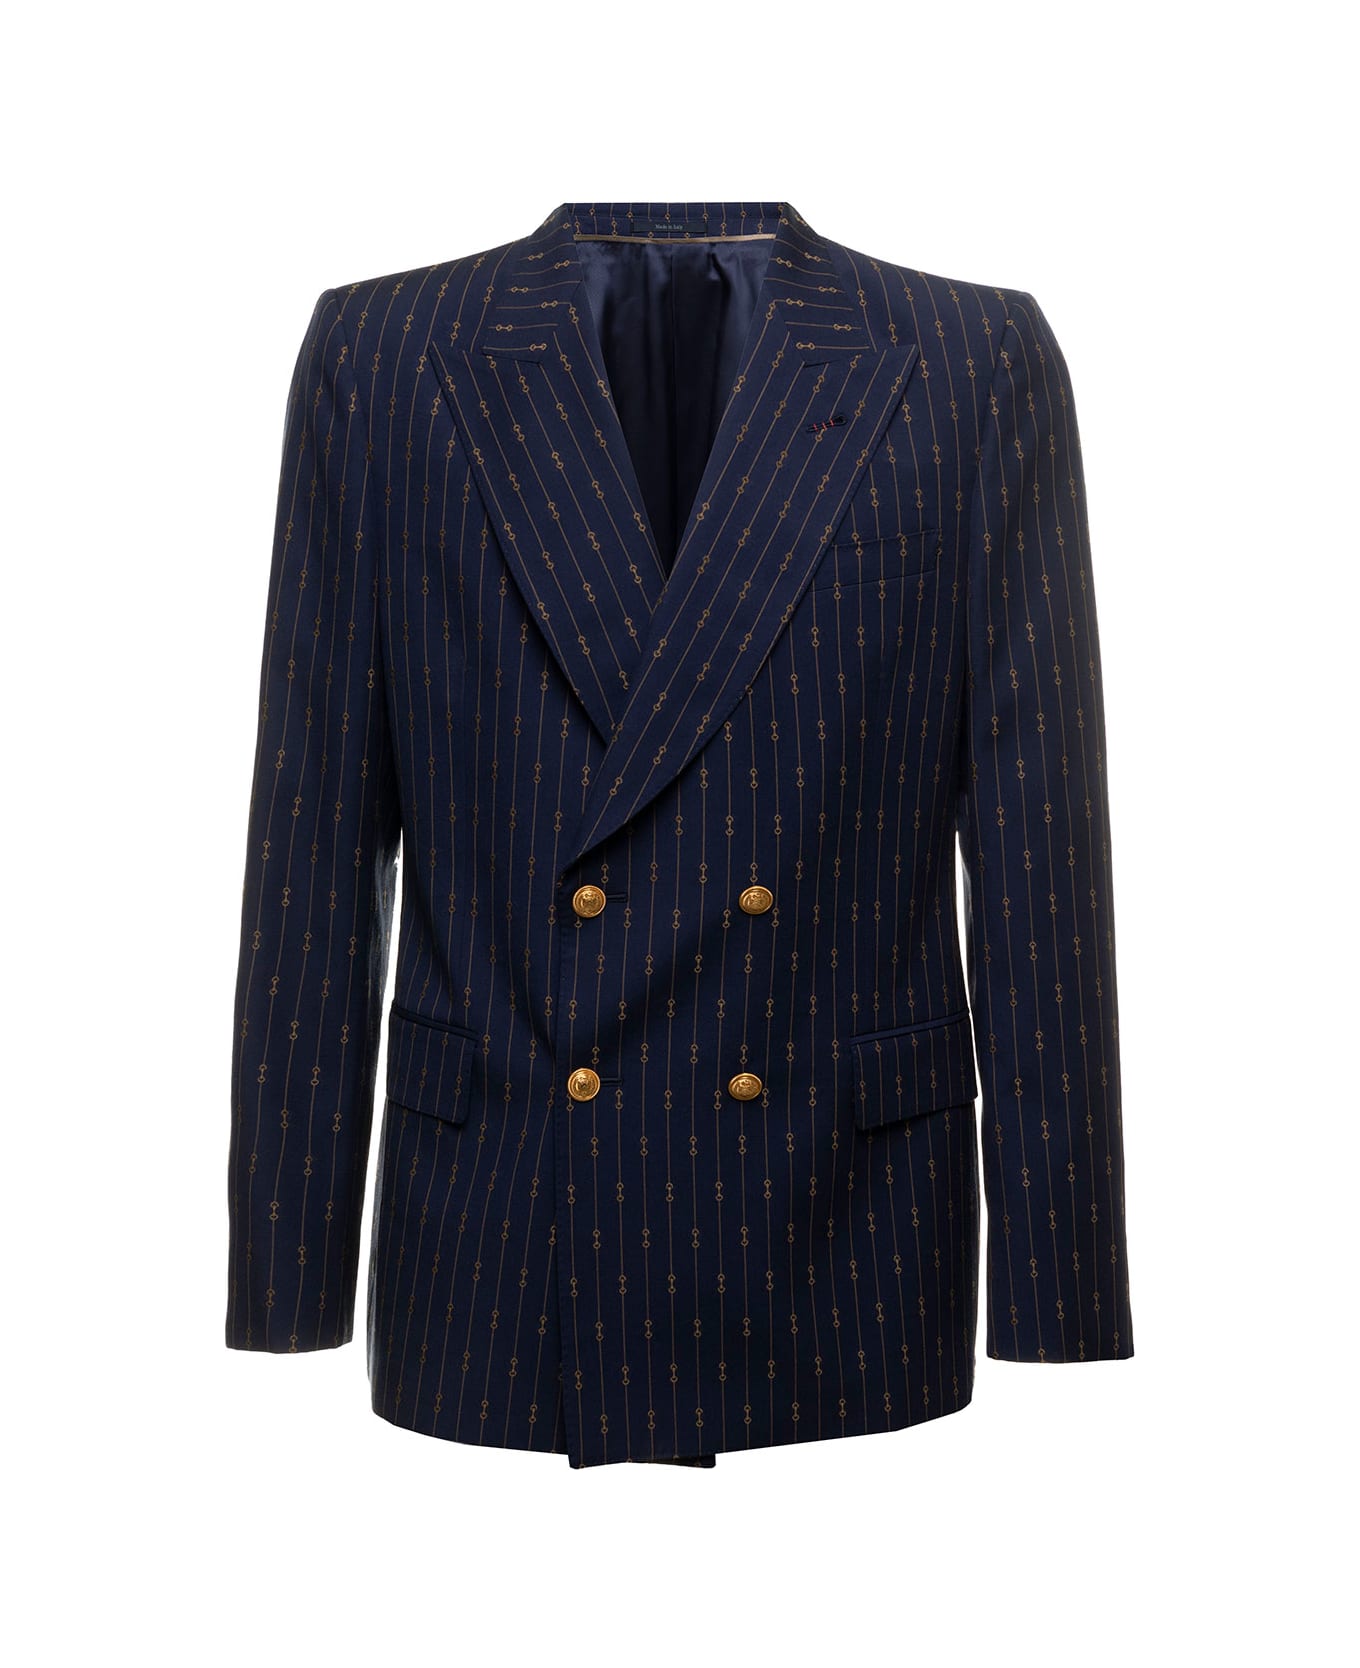 Gucci Man's Blue Printed Wool Double-breasted Blazer - blue